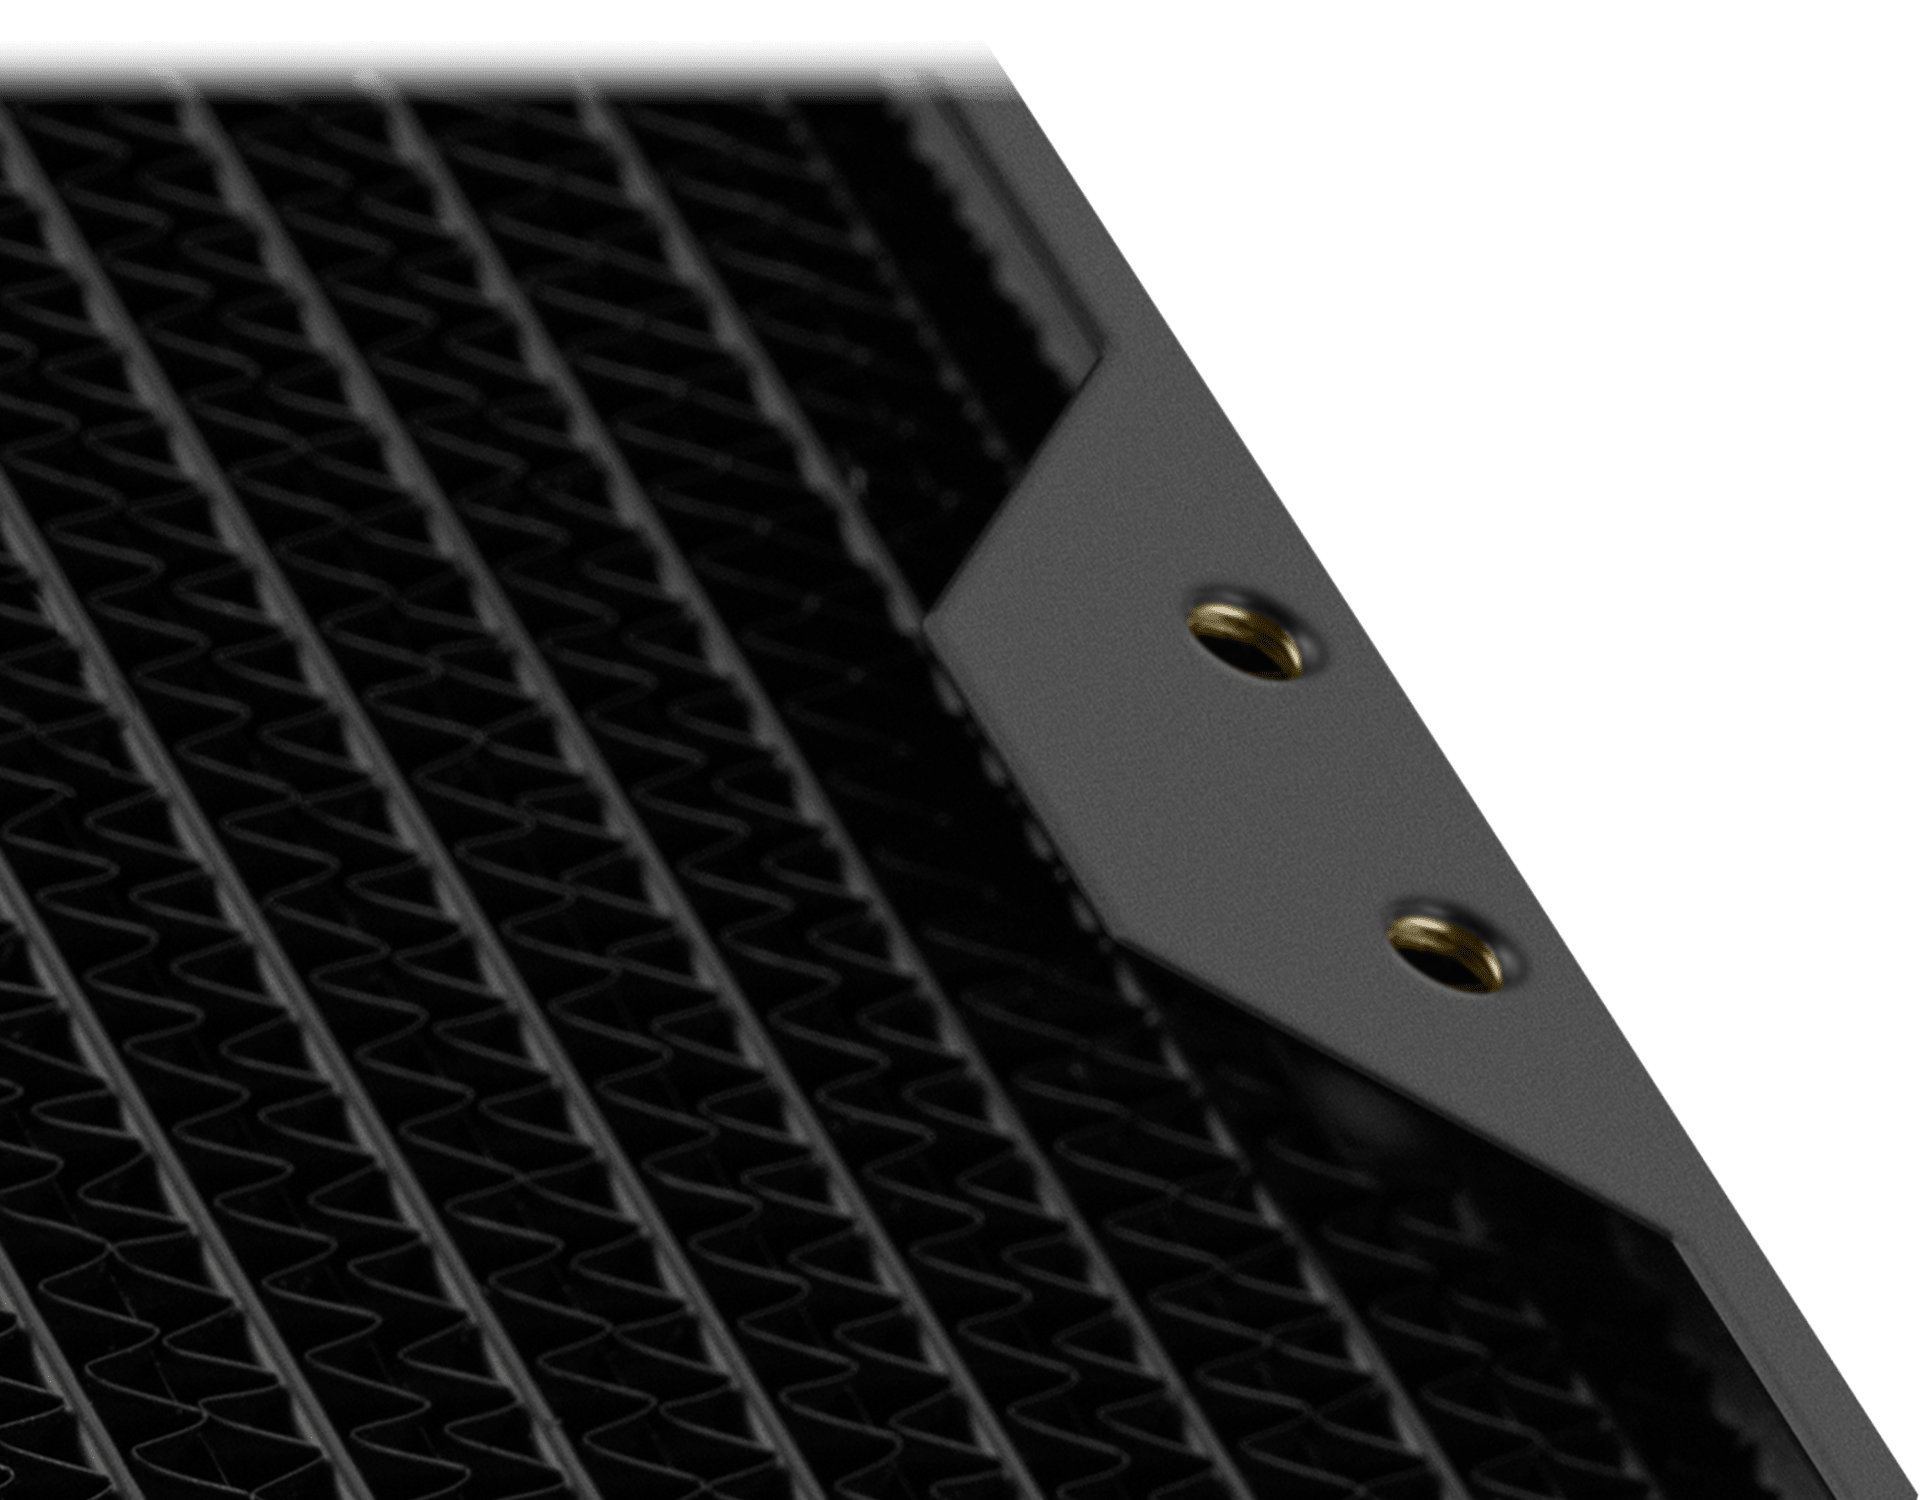 Hydro X Series XR5 420 NEO Water Cooling Radiator